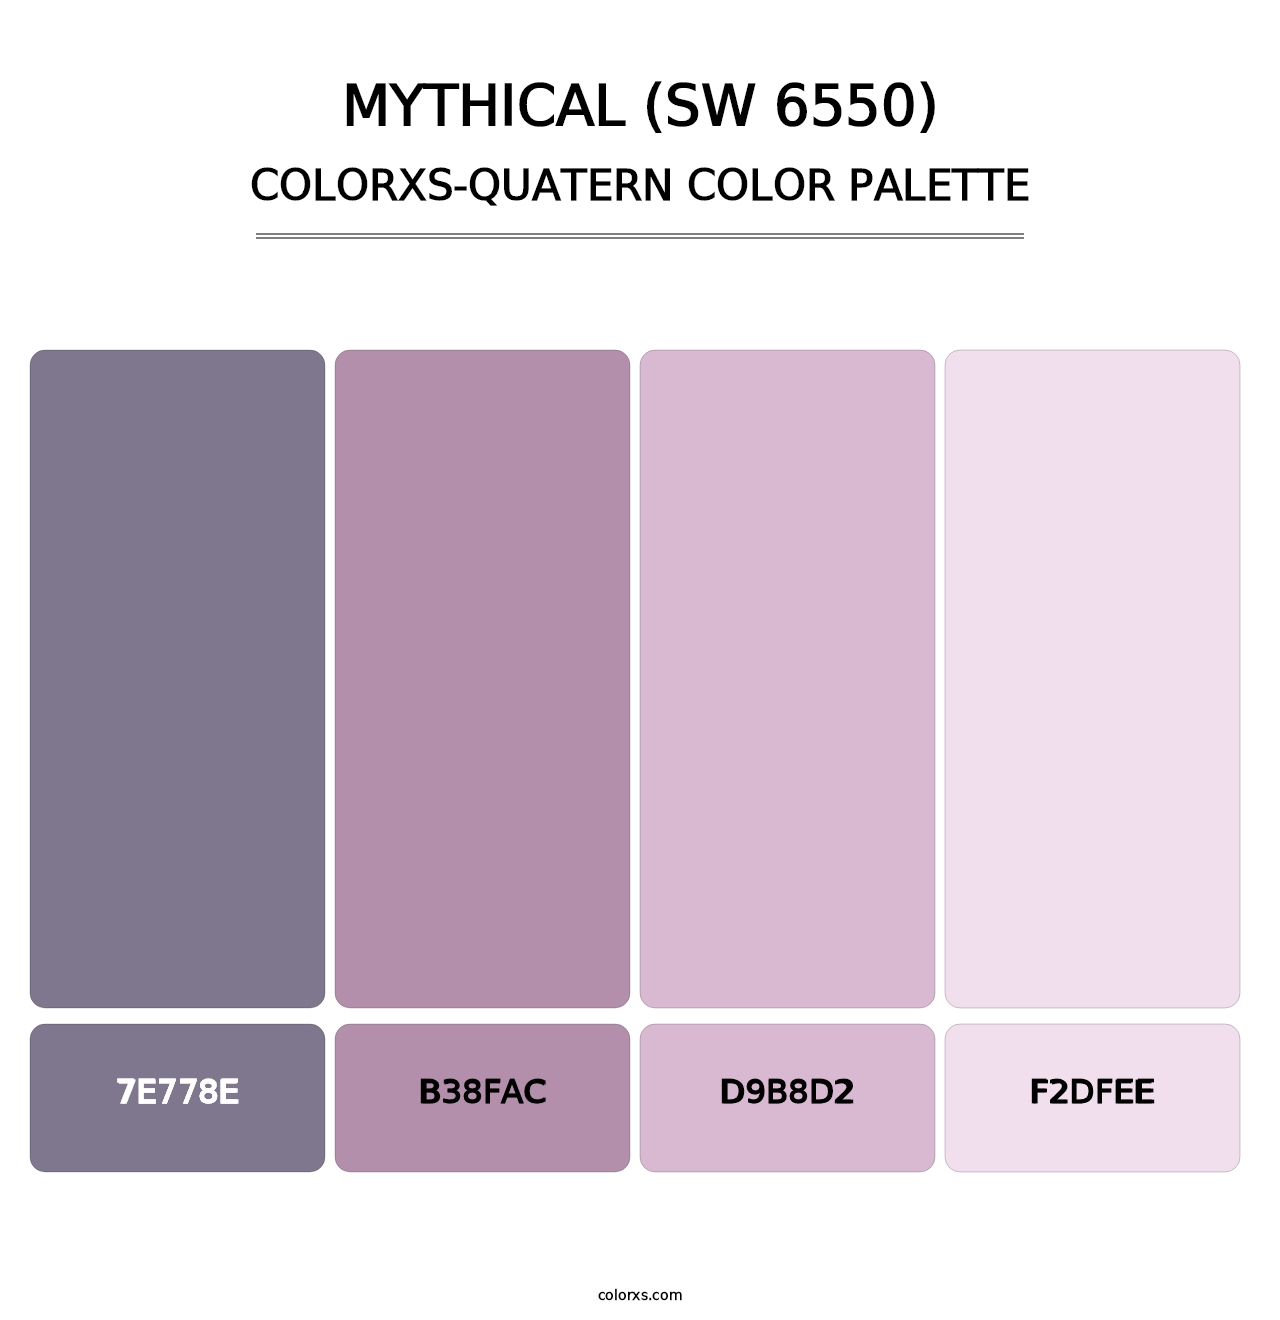 Mythical (SW 6550) - Colorxs Quatern Palette